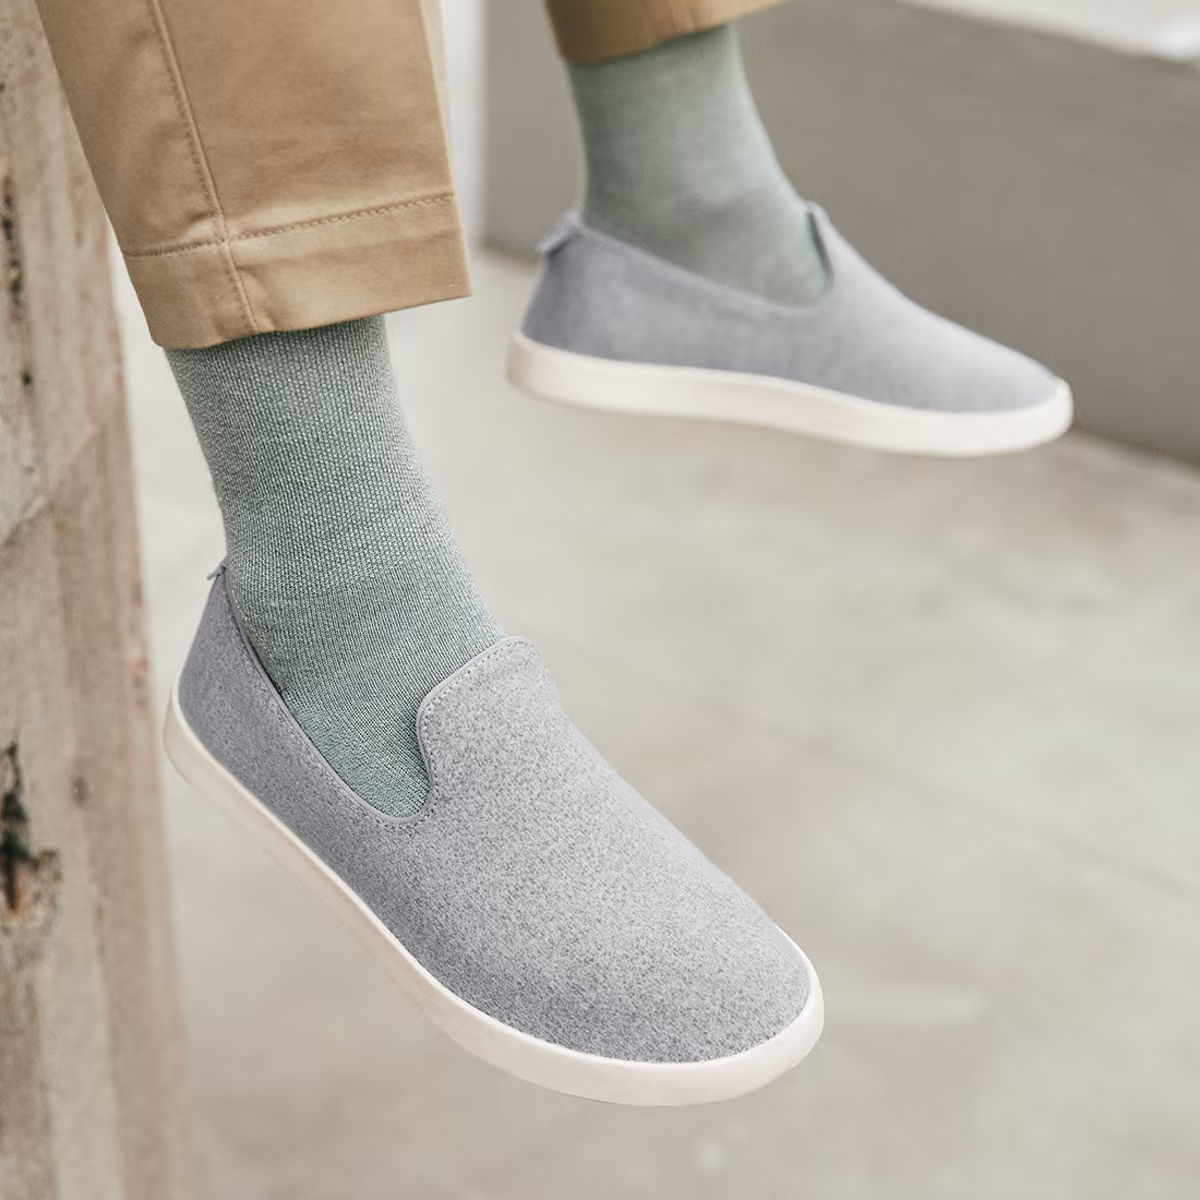 Allbirds Wool Loungers Shoes Review